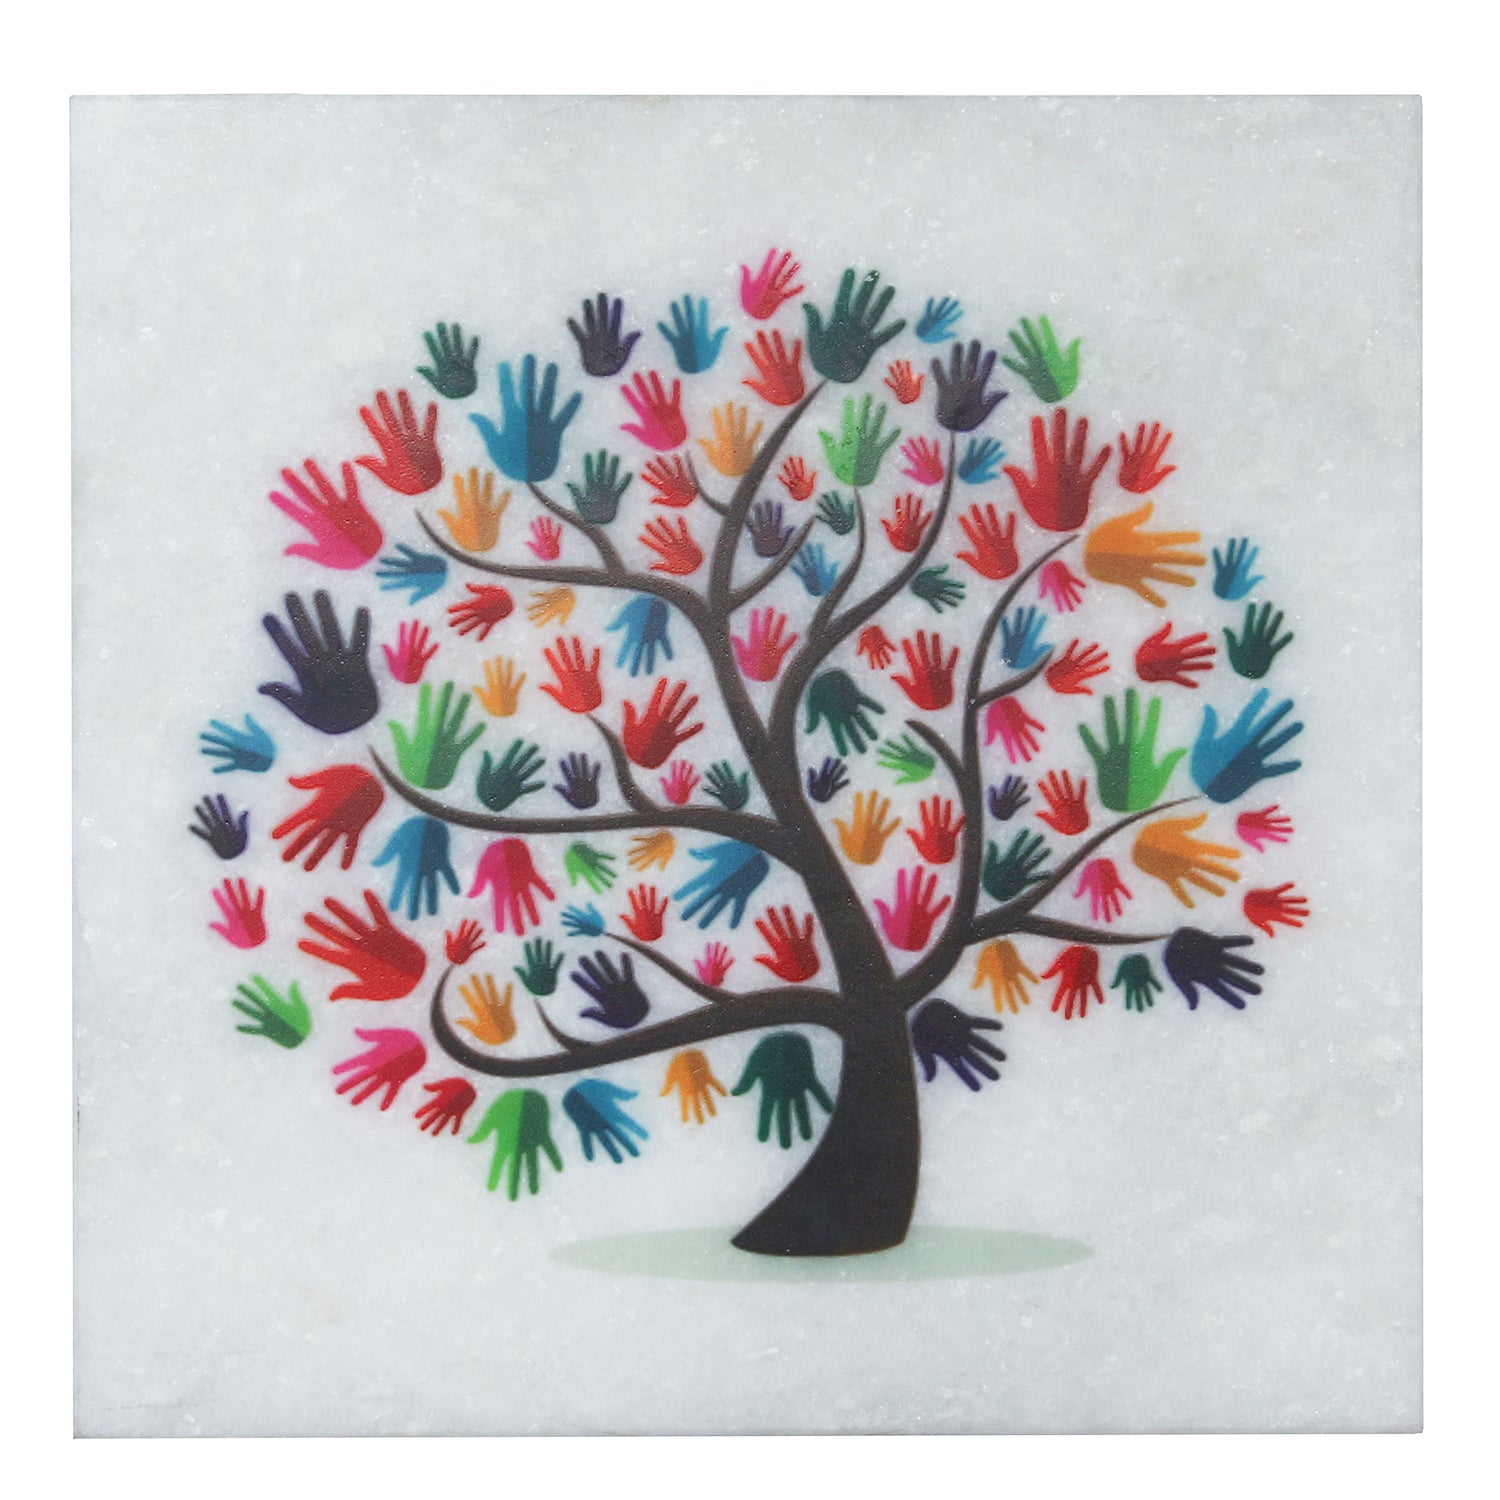 Colorful Hands Tree Painting On Marble Square Tile 1